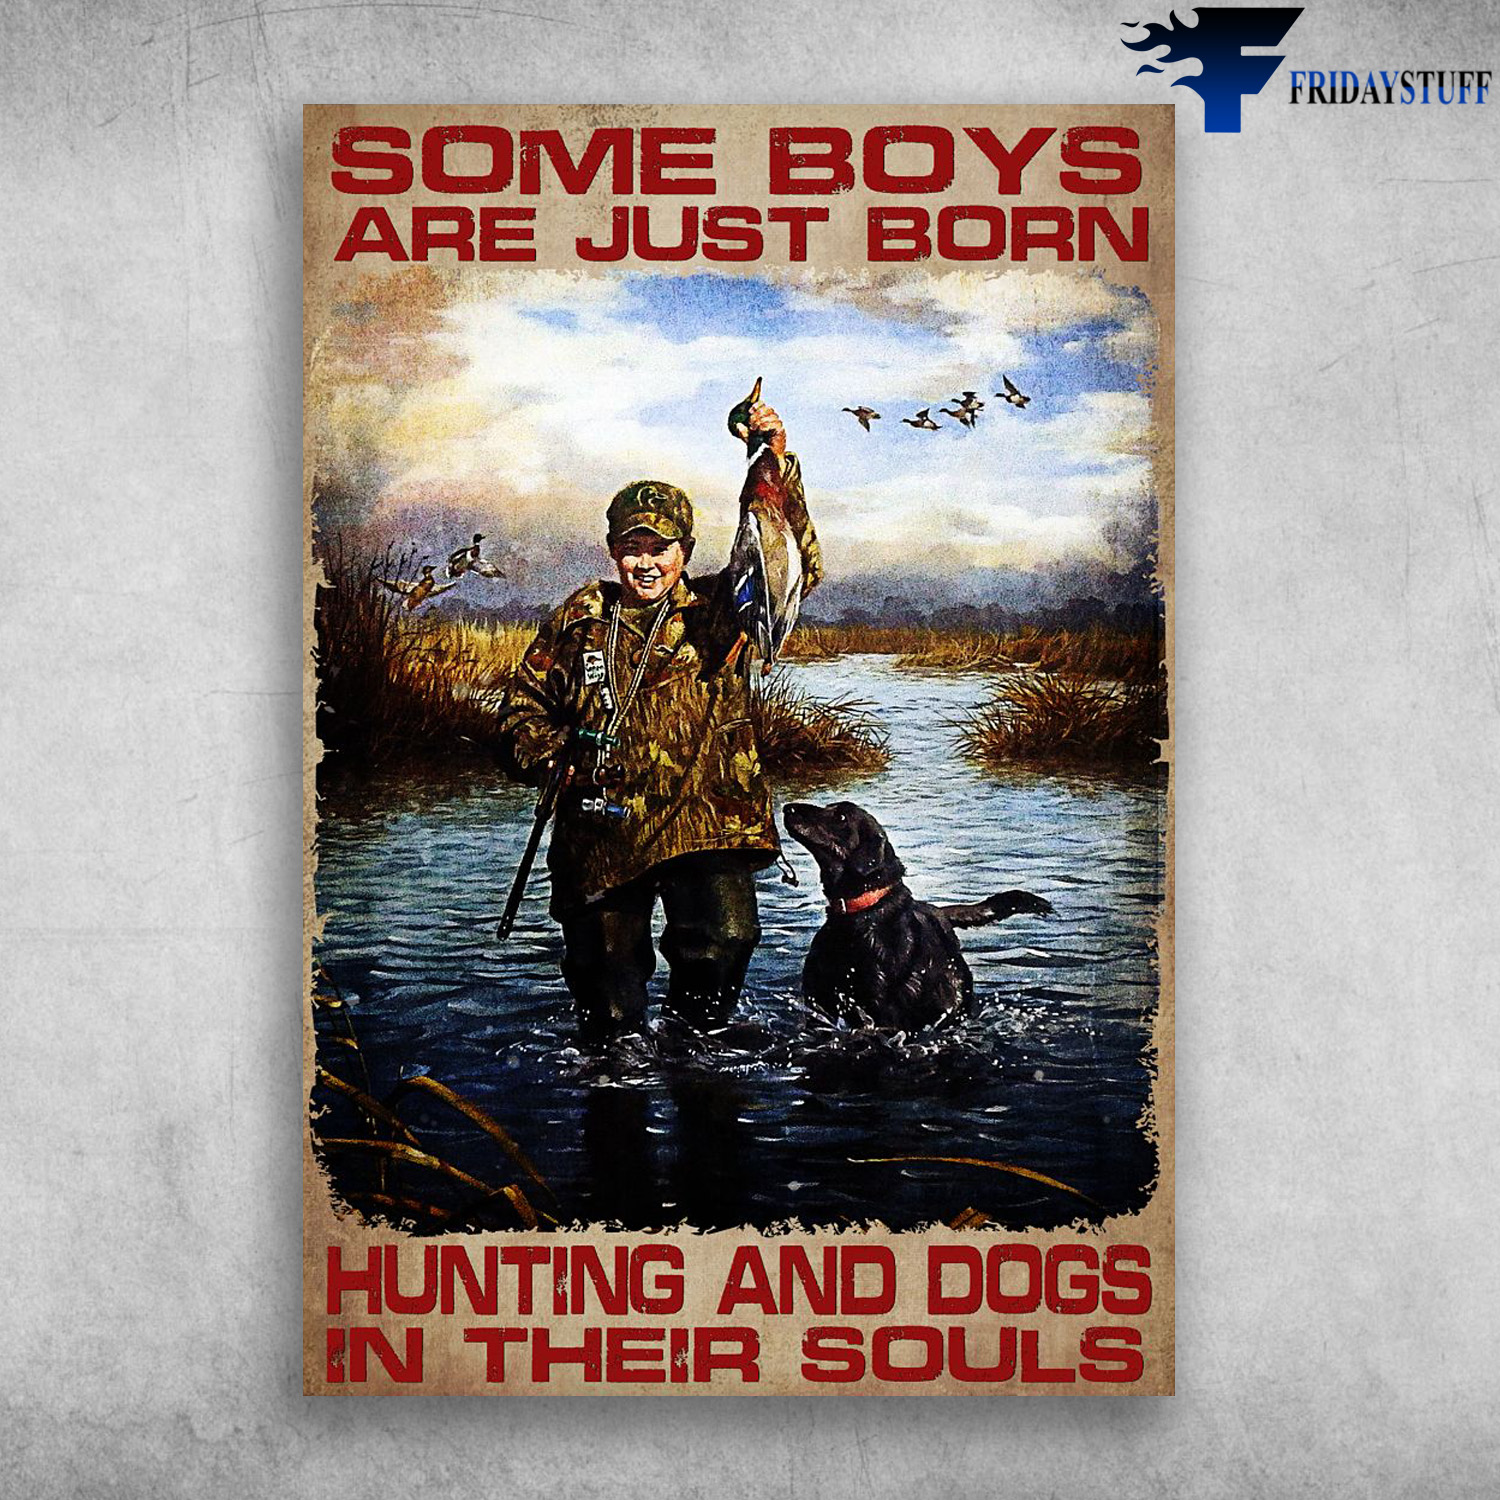 Duck Hunting With Dog - Some Boys Are Just Born, Hunting And Dogs In Their Soul